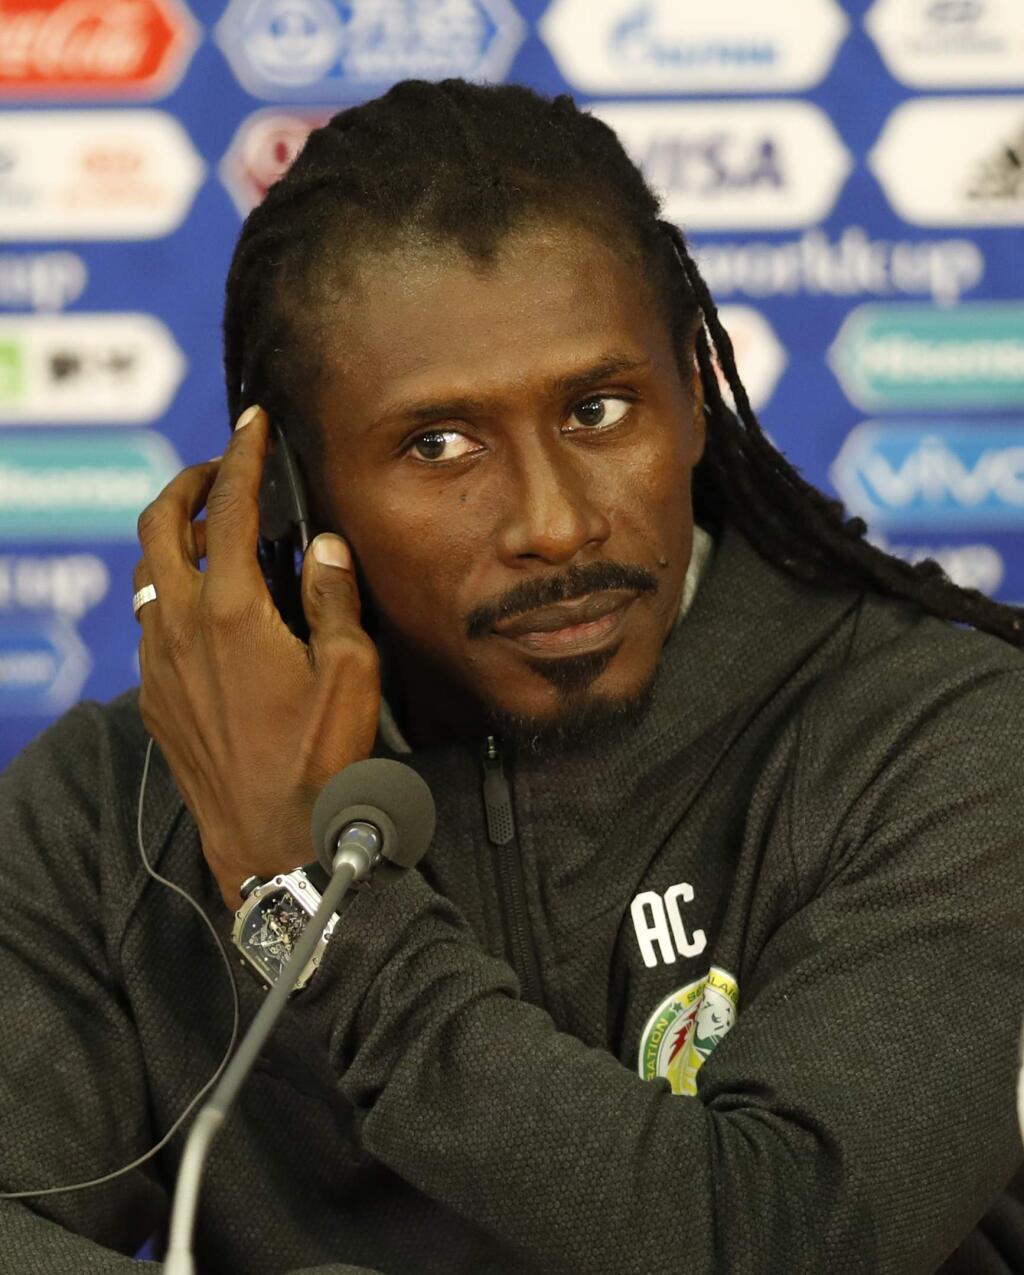 Senegal coach Aliou Cisse attend a press conference before Senegal's official training on the eve of the group H match between Poland and Senegal at the 2018 soccer World Cup in the Spartak Stadium in Moscow, Russia, Monday, June 18, 2018. (AP Photo/Eduardo Verdugo)